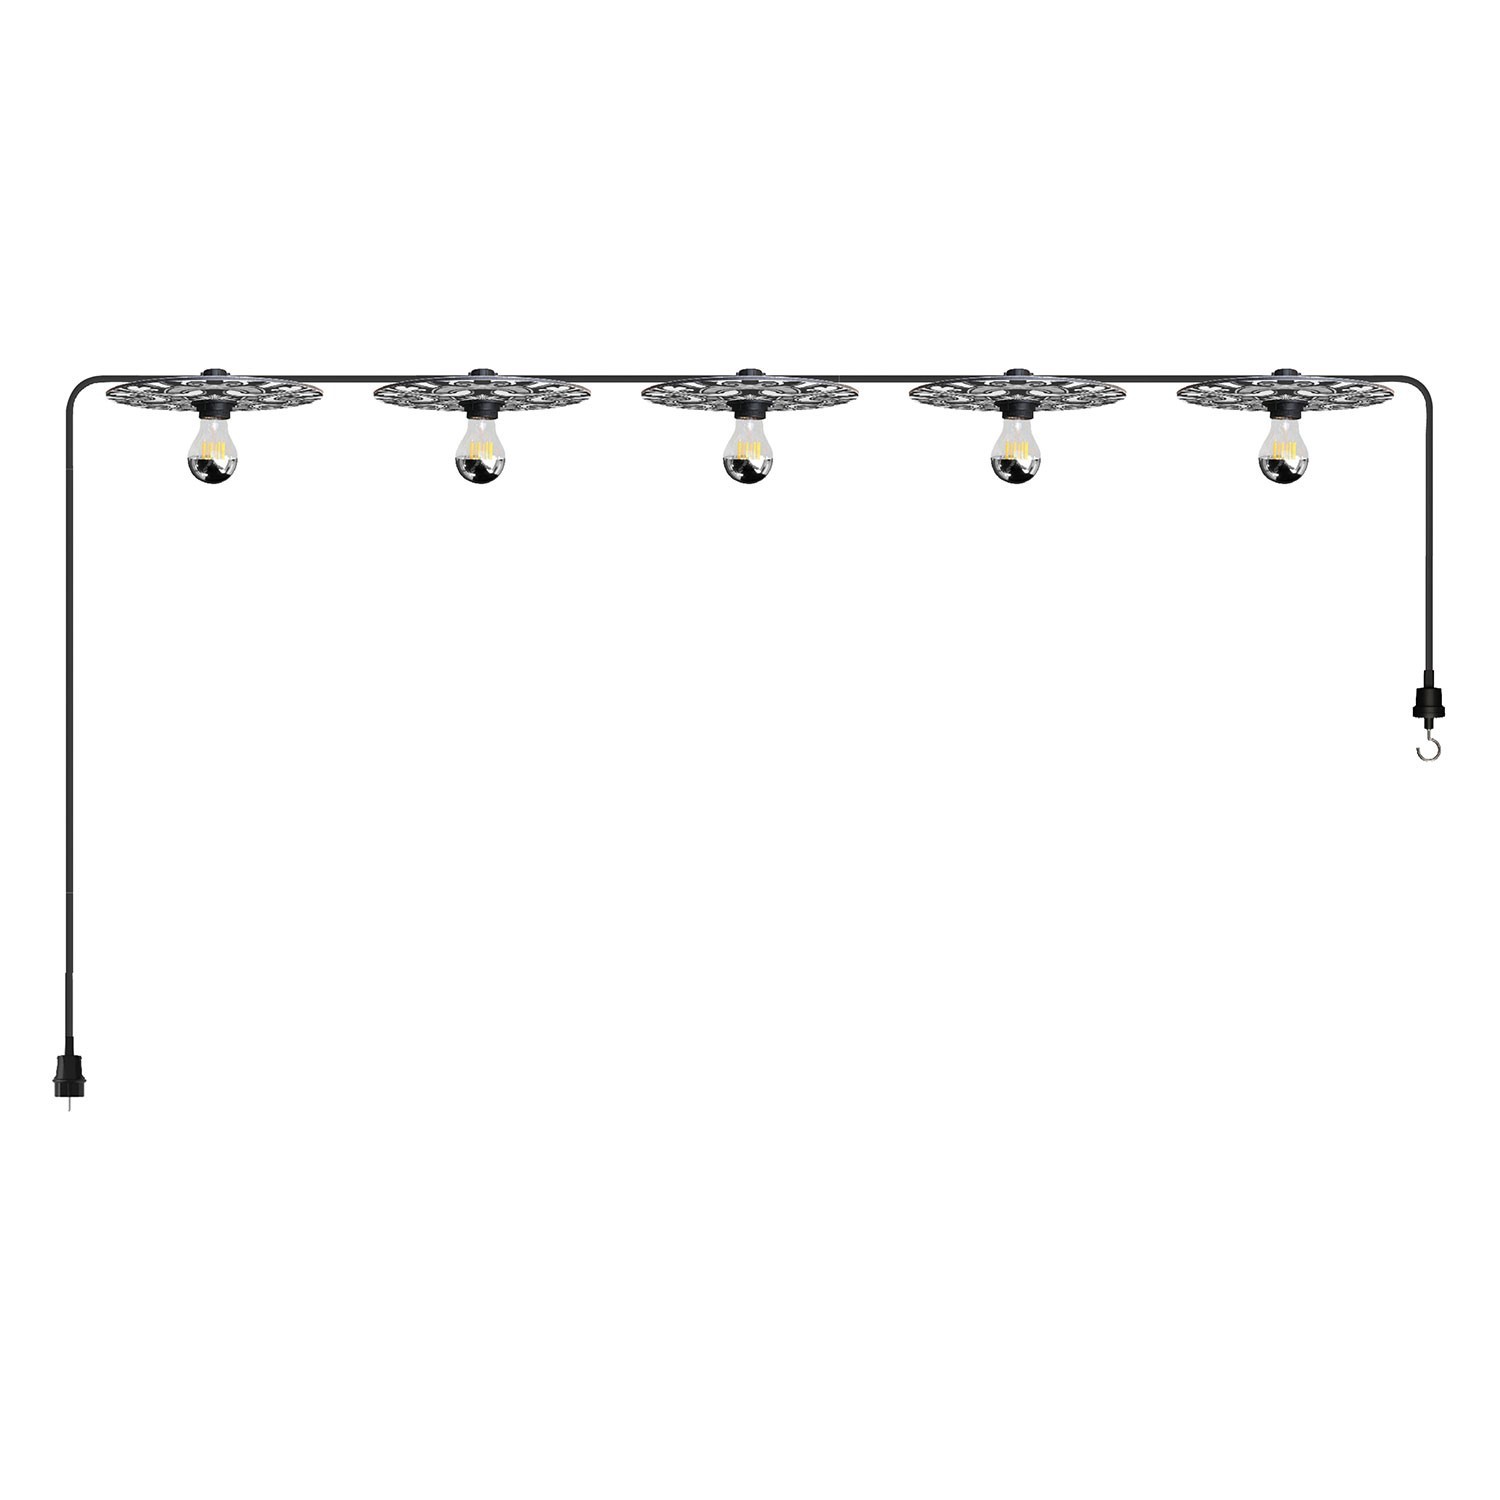 Maioliche' String Light Lumet System starting from 7,5 m with fabric cable, 5 lamp holders and lampshades, hook and black plug